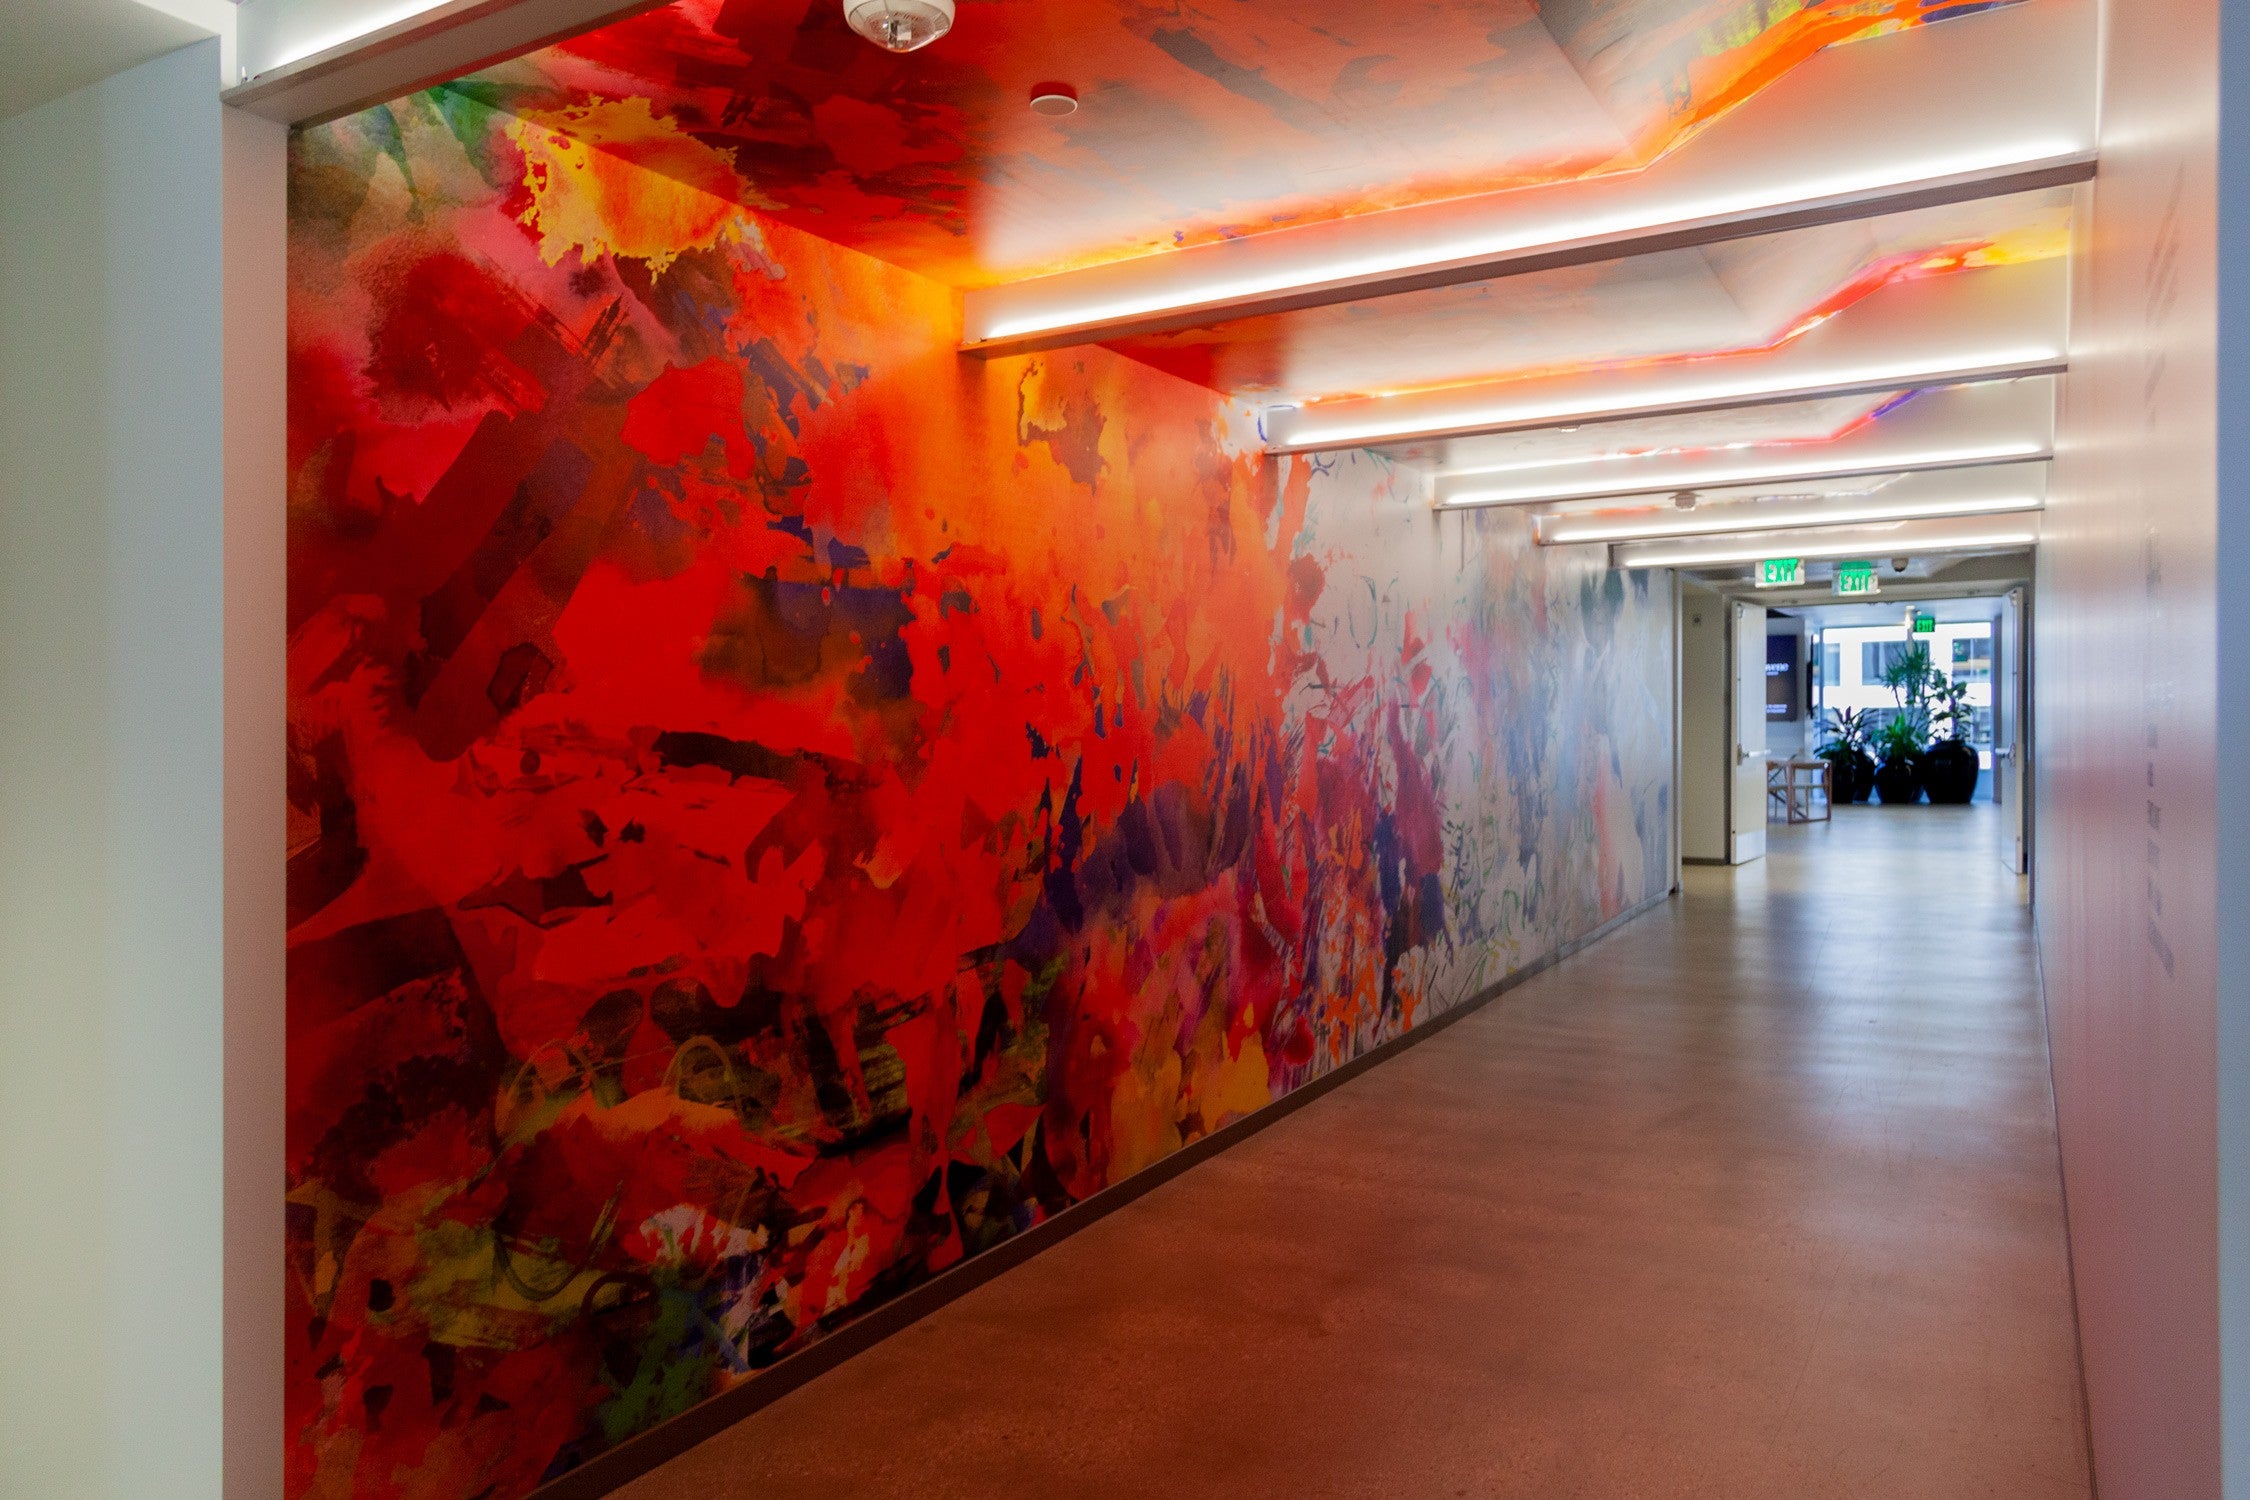 Corridor in Convene DTLA illuminated by a rich, red-toned abstract mural along the wall, enhancing the passageway with a bold artistic expression.